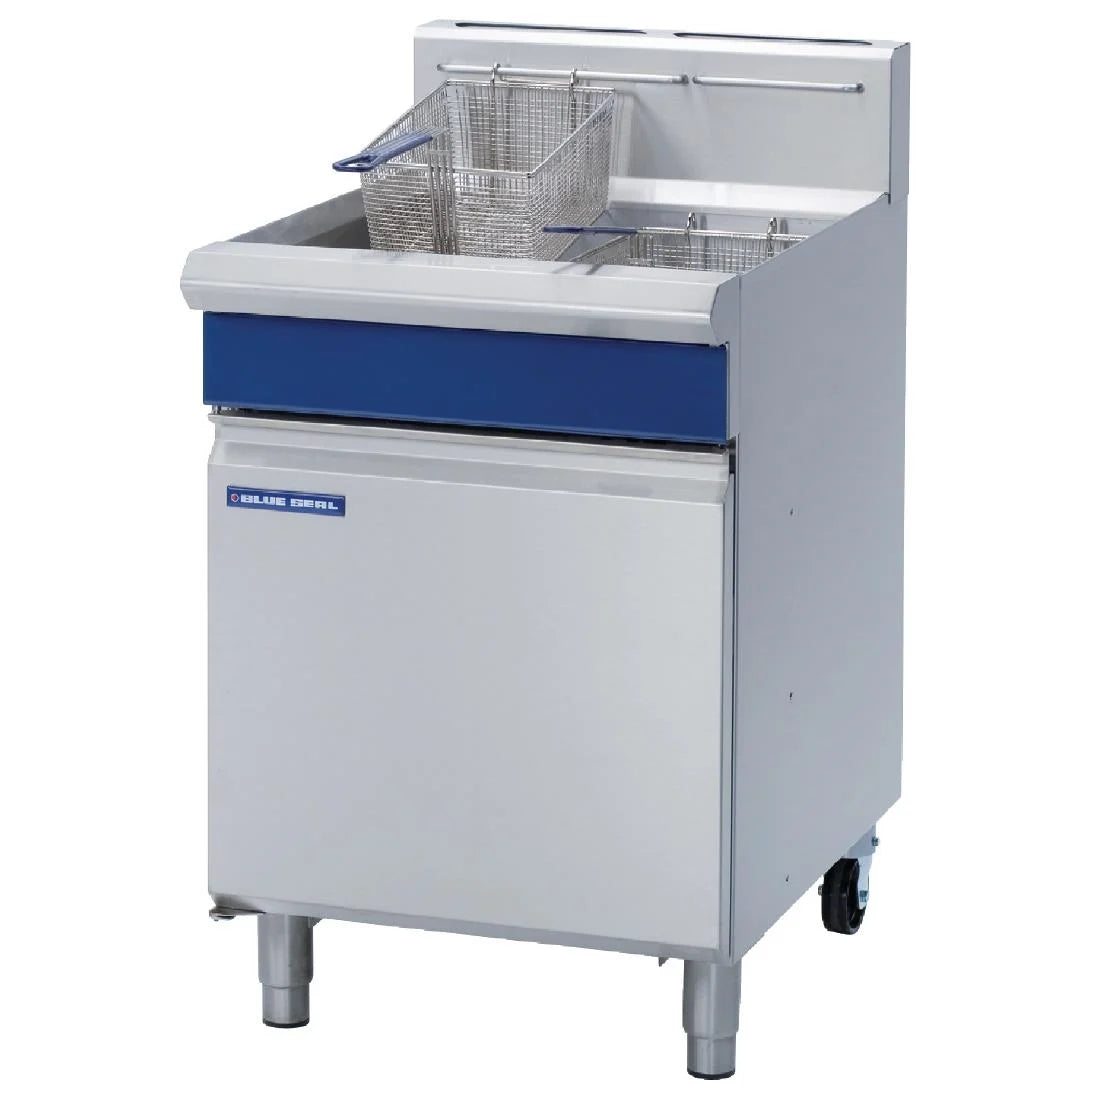 Blue Seal GT60 Single Tank Twin Basket Free Standing Natural Gas Fryer. Product Ref:00613.Model: GT60. 🚚 3-5 DAYS Delivery